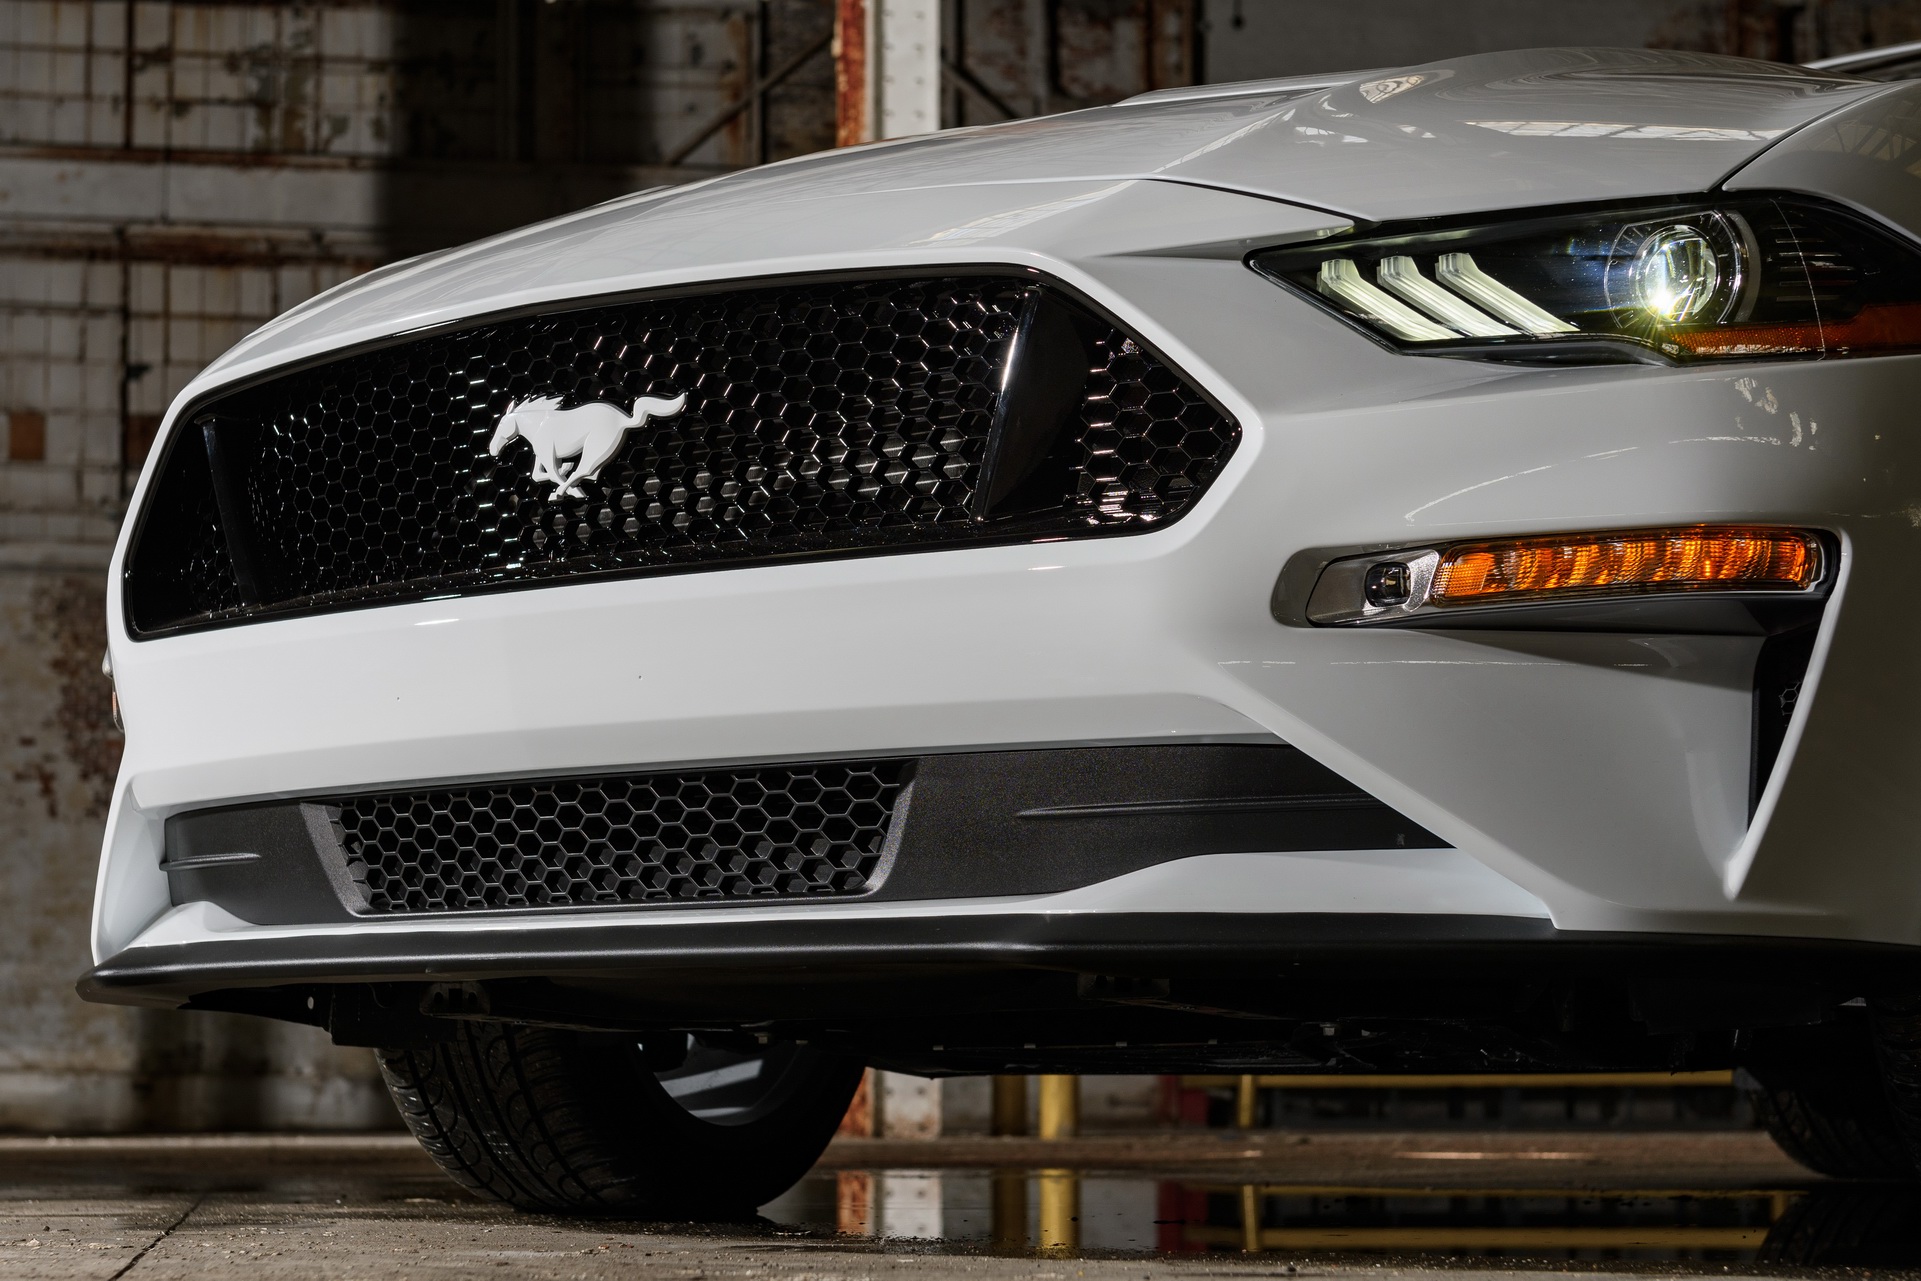 2022 Ford Mustang Ice White Appearance Package Grille Wallpapers #11 of 24